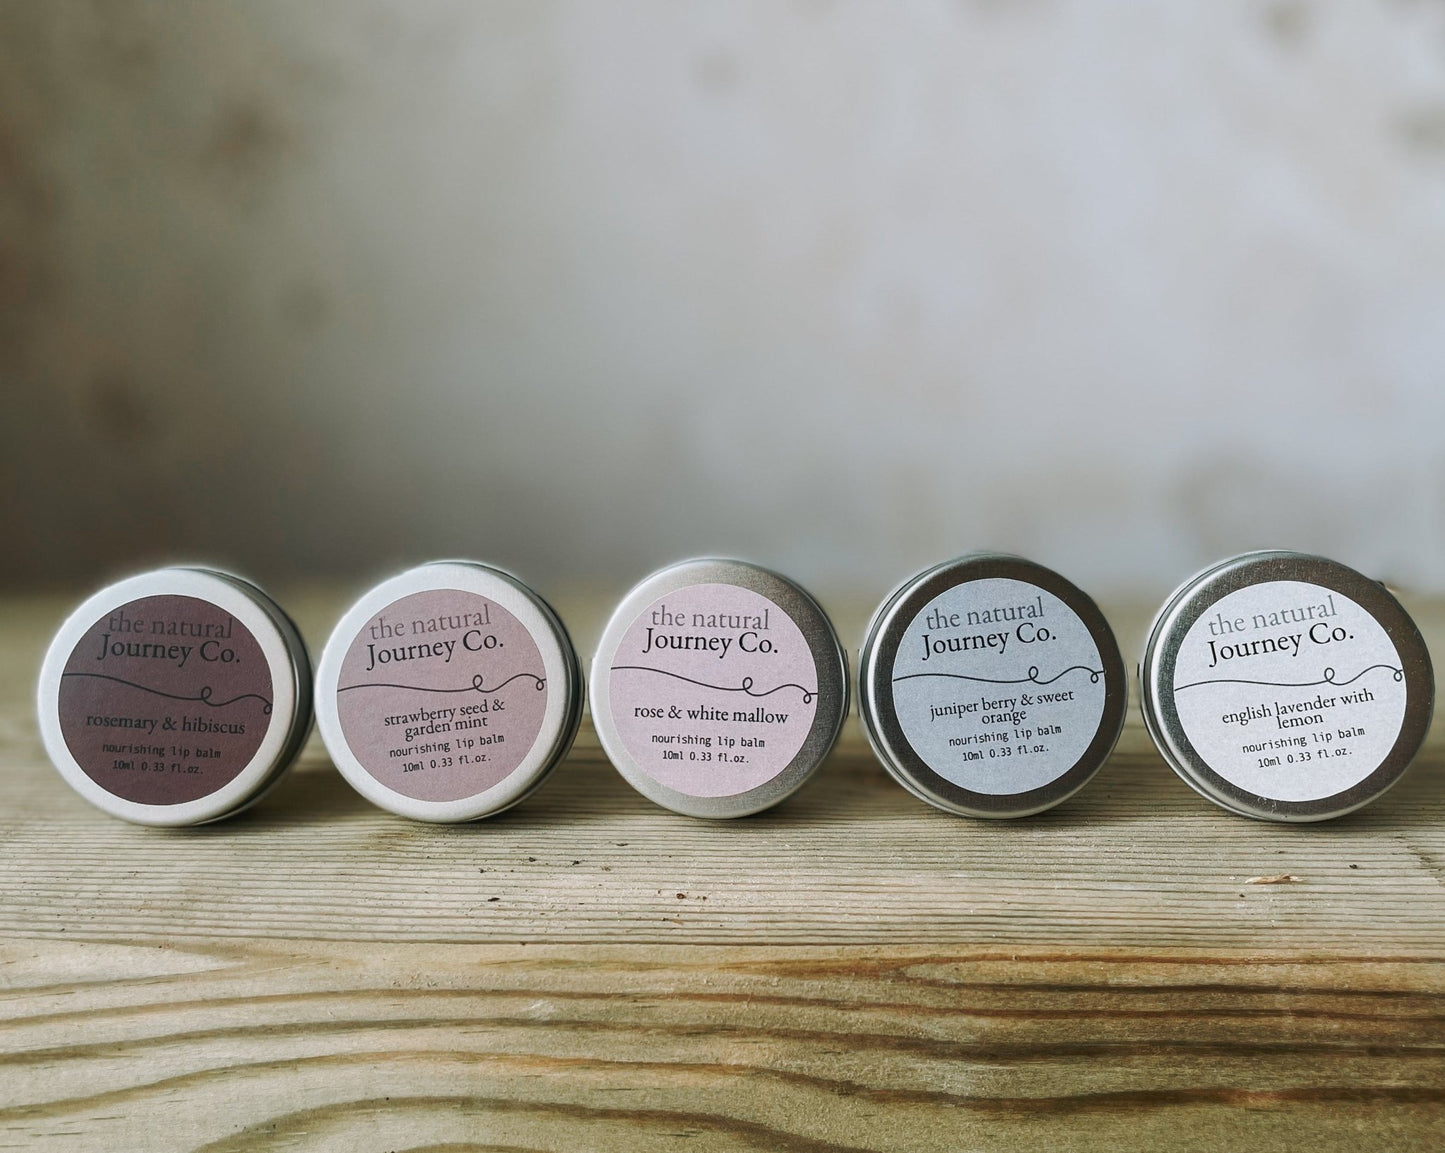 Strawberry Seed & Garden Mint Natural Lip Balm - The Natural Journey Company